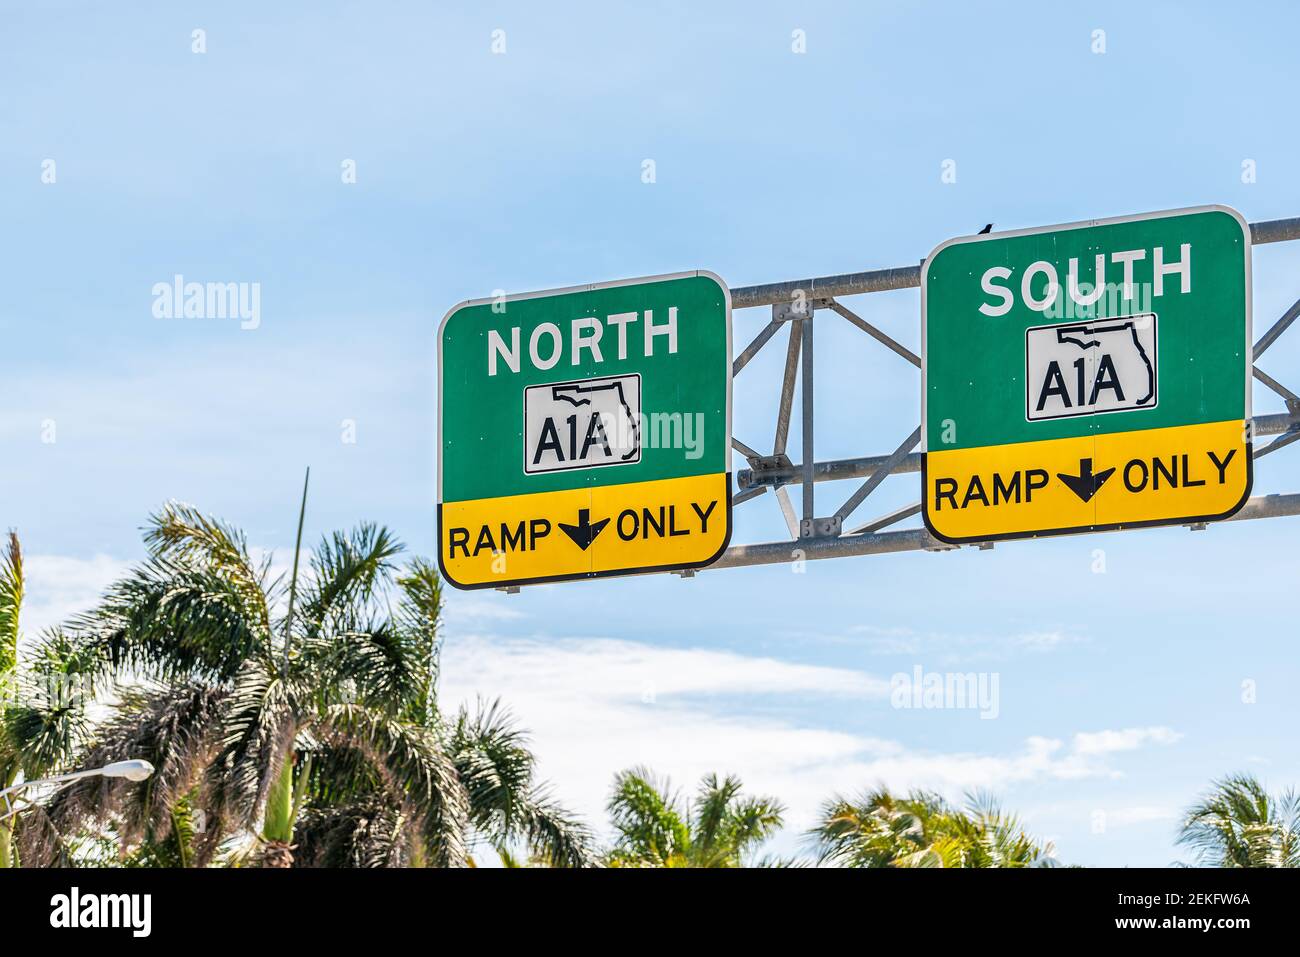 Florida state road highway street A1A to North or South ramp only direction signs in Miami Dade county with palm trees and blue sky Stock Photo